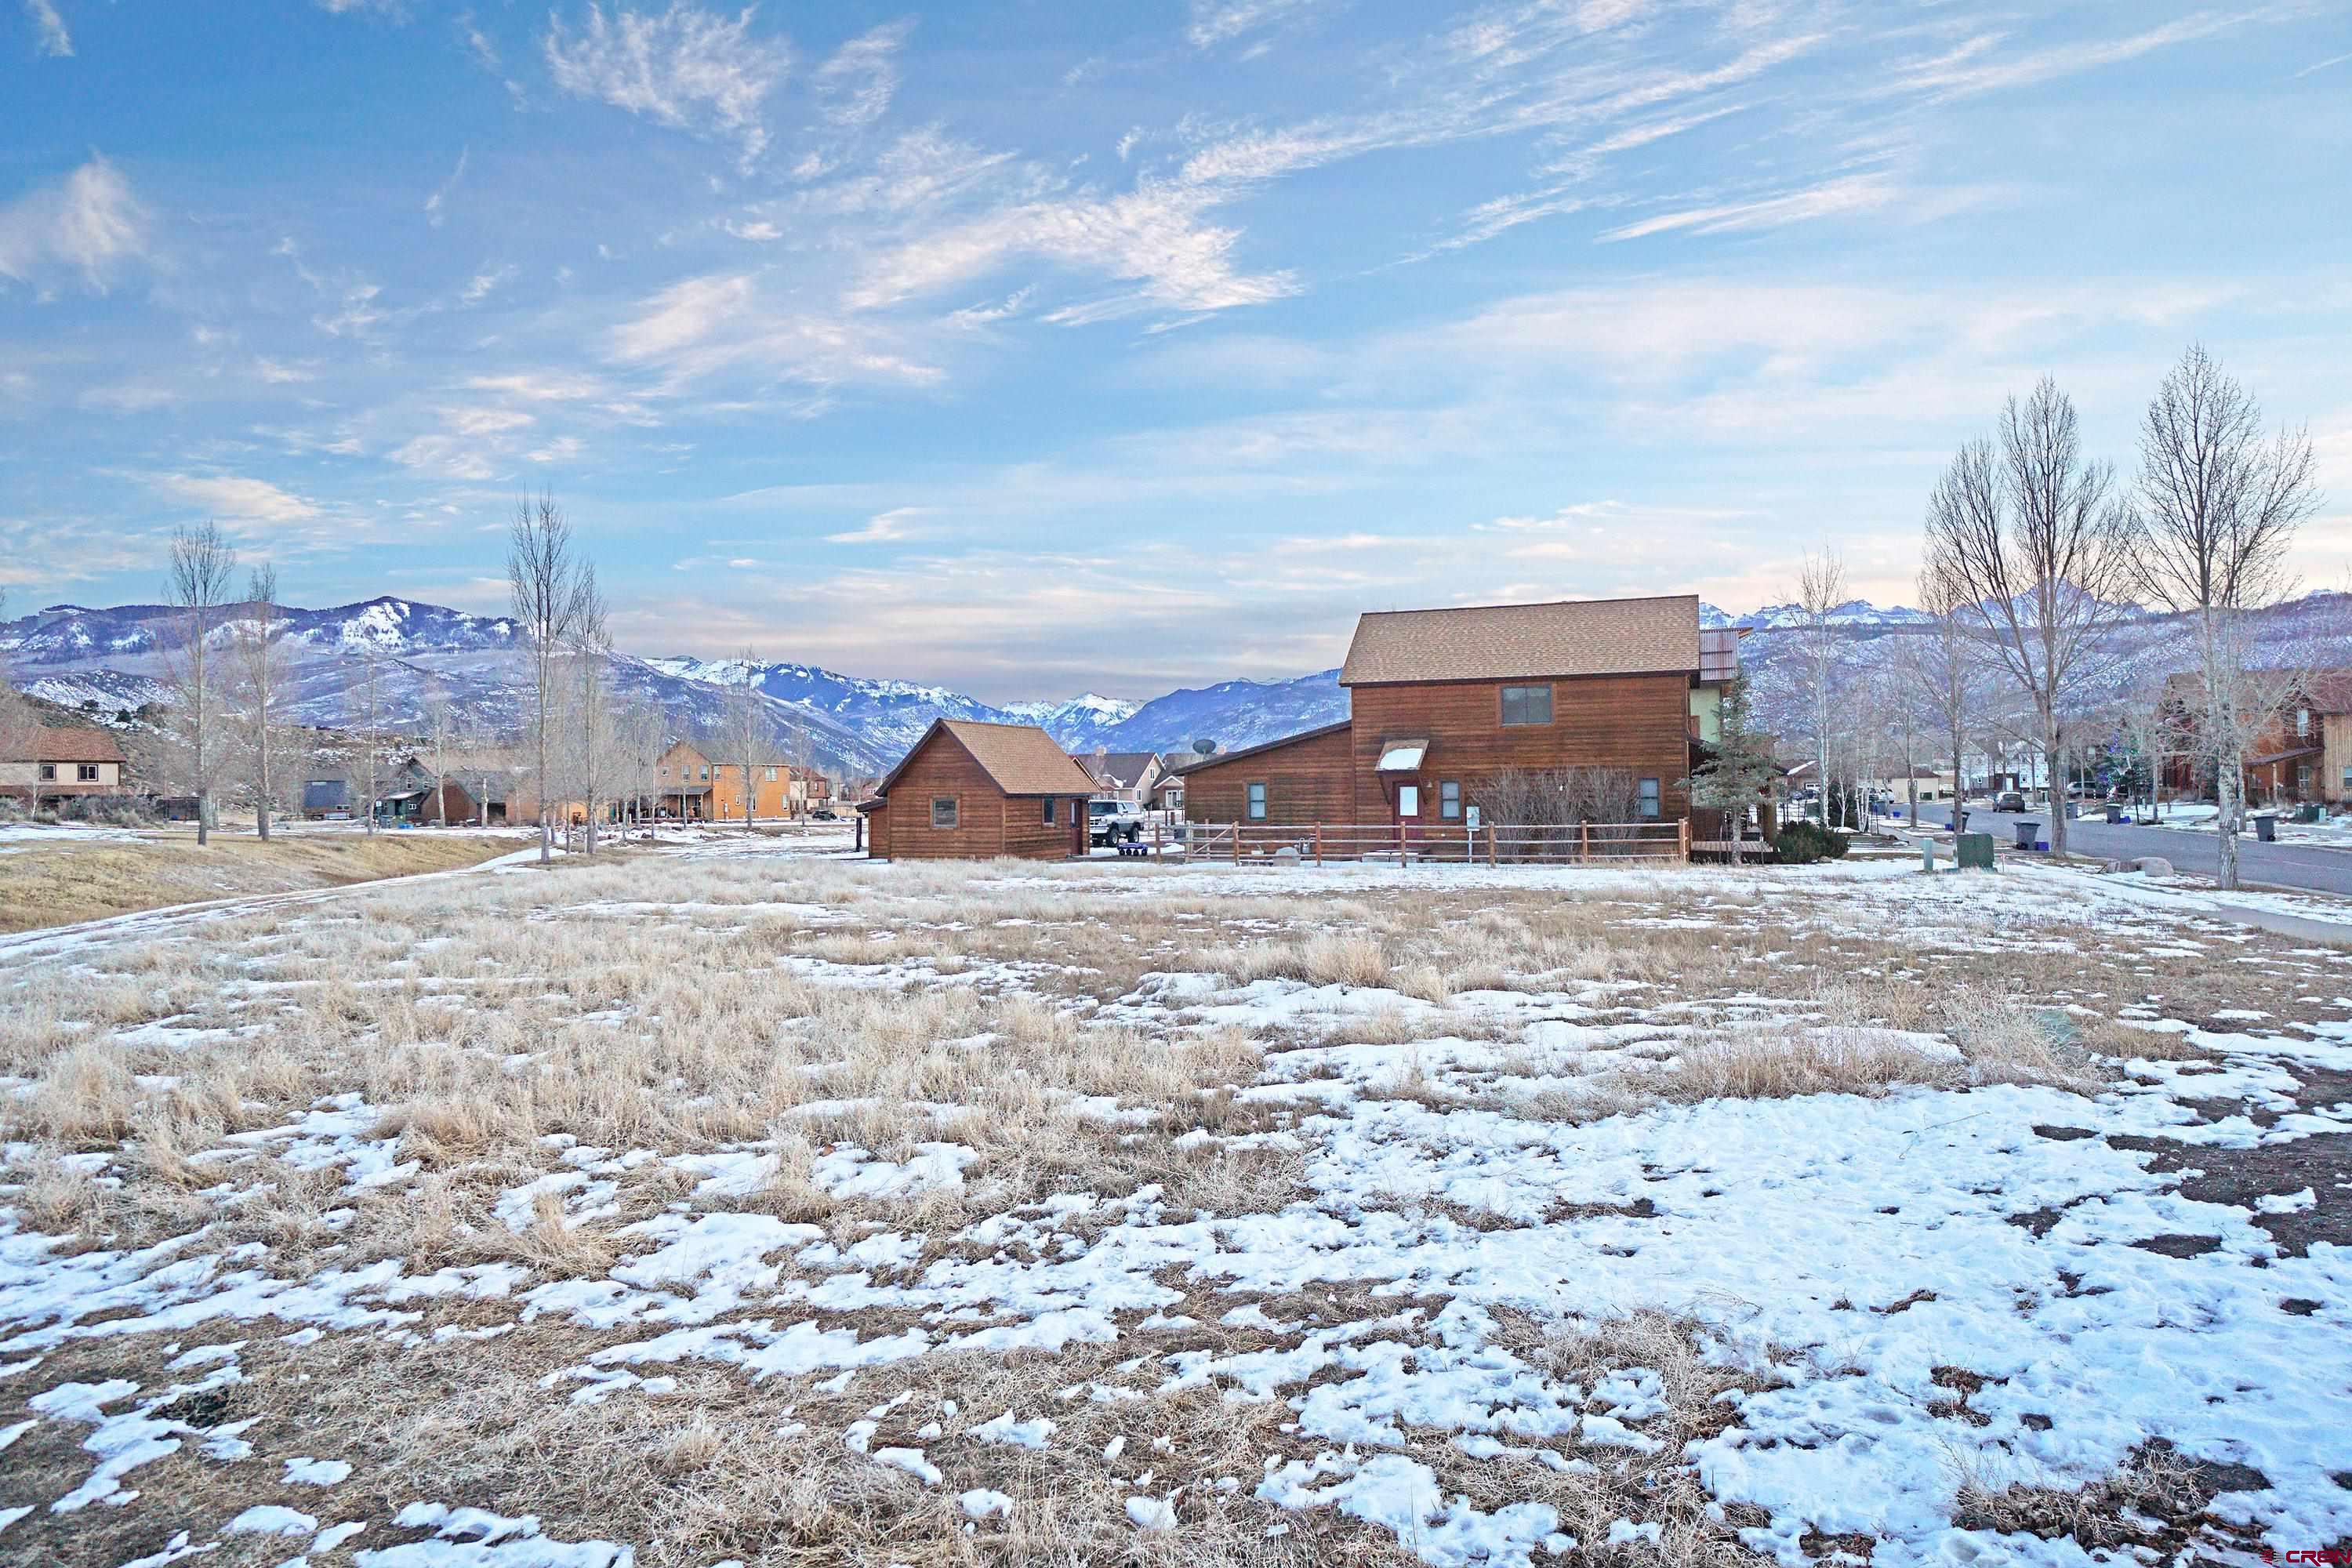 Incredible duplex lot with great views in River Park!  Views of the San Juan Mountains including Mt. Sneffels clear down Ouray Valley and Abrams Mountain!  Numerous building options for the buyer, including single family (buyer to verify with Town of Ridgway, County, and HOA).  The property backs up to open space.  Lightning quick fiber optic internet from Clearnetworx is currently in the works for the entire area.  To top it off, $5160 has already been paid towards the water tap and $6020 is pre-paid towards the sewer tap.  Buyer will need to verify balance to be paid for each with the Town of Ridgway as there are numerous possibilities/configurations depending on what they are building.  If you enjoy beautiful scenery, outdoor activities, and friendly people, your search is over. Recreational activities abound in the area. Ridgway State Park which has great boating, fishing, and camping is located about 5 minutes away. Telluride and its exceptional skiing is a short 45 minute drive. The mountains are well known for their stunning vistas which can be reached by 4WD or hiking for the more adventurous. There is also biking, rafting, camping, fishing, hunting, and a host of other activities. Ridgway is still a small town with some of the friendliest people you will ever meet. There are plenty of great eating establishments, art galleries, and cultural activities to keep everyone entertained. Montrose is located only 30 minutes north which offers about anything you will ever need. They have one of the top rated regional hospitals in the country, regional airport, Home Depot, large grocery stores, Walmart, and numerous other national and local businesses.